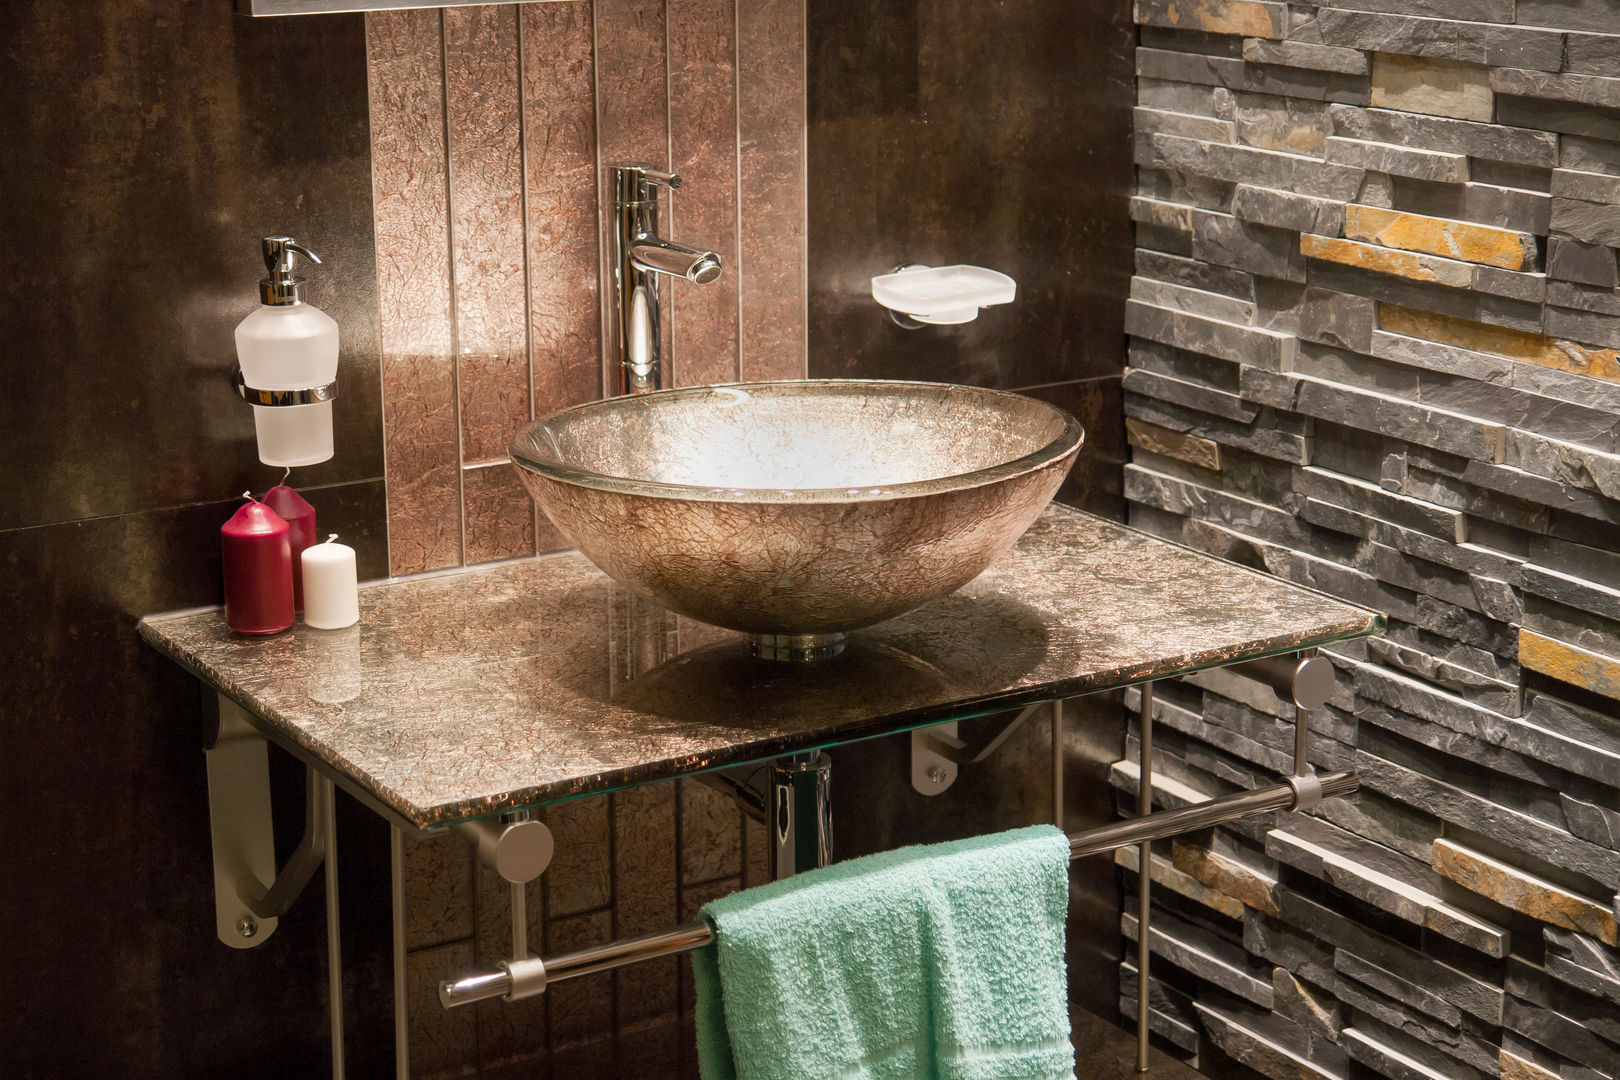 Exposed Brick, Statement Sink Gracious Luxury Interiors Phòng tắm